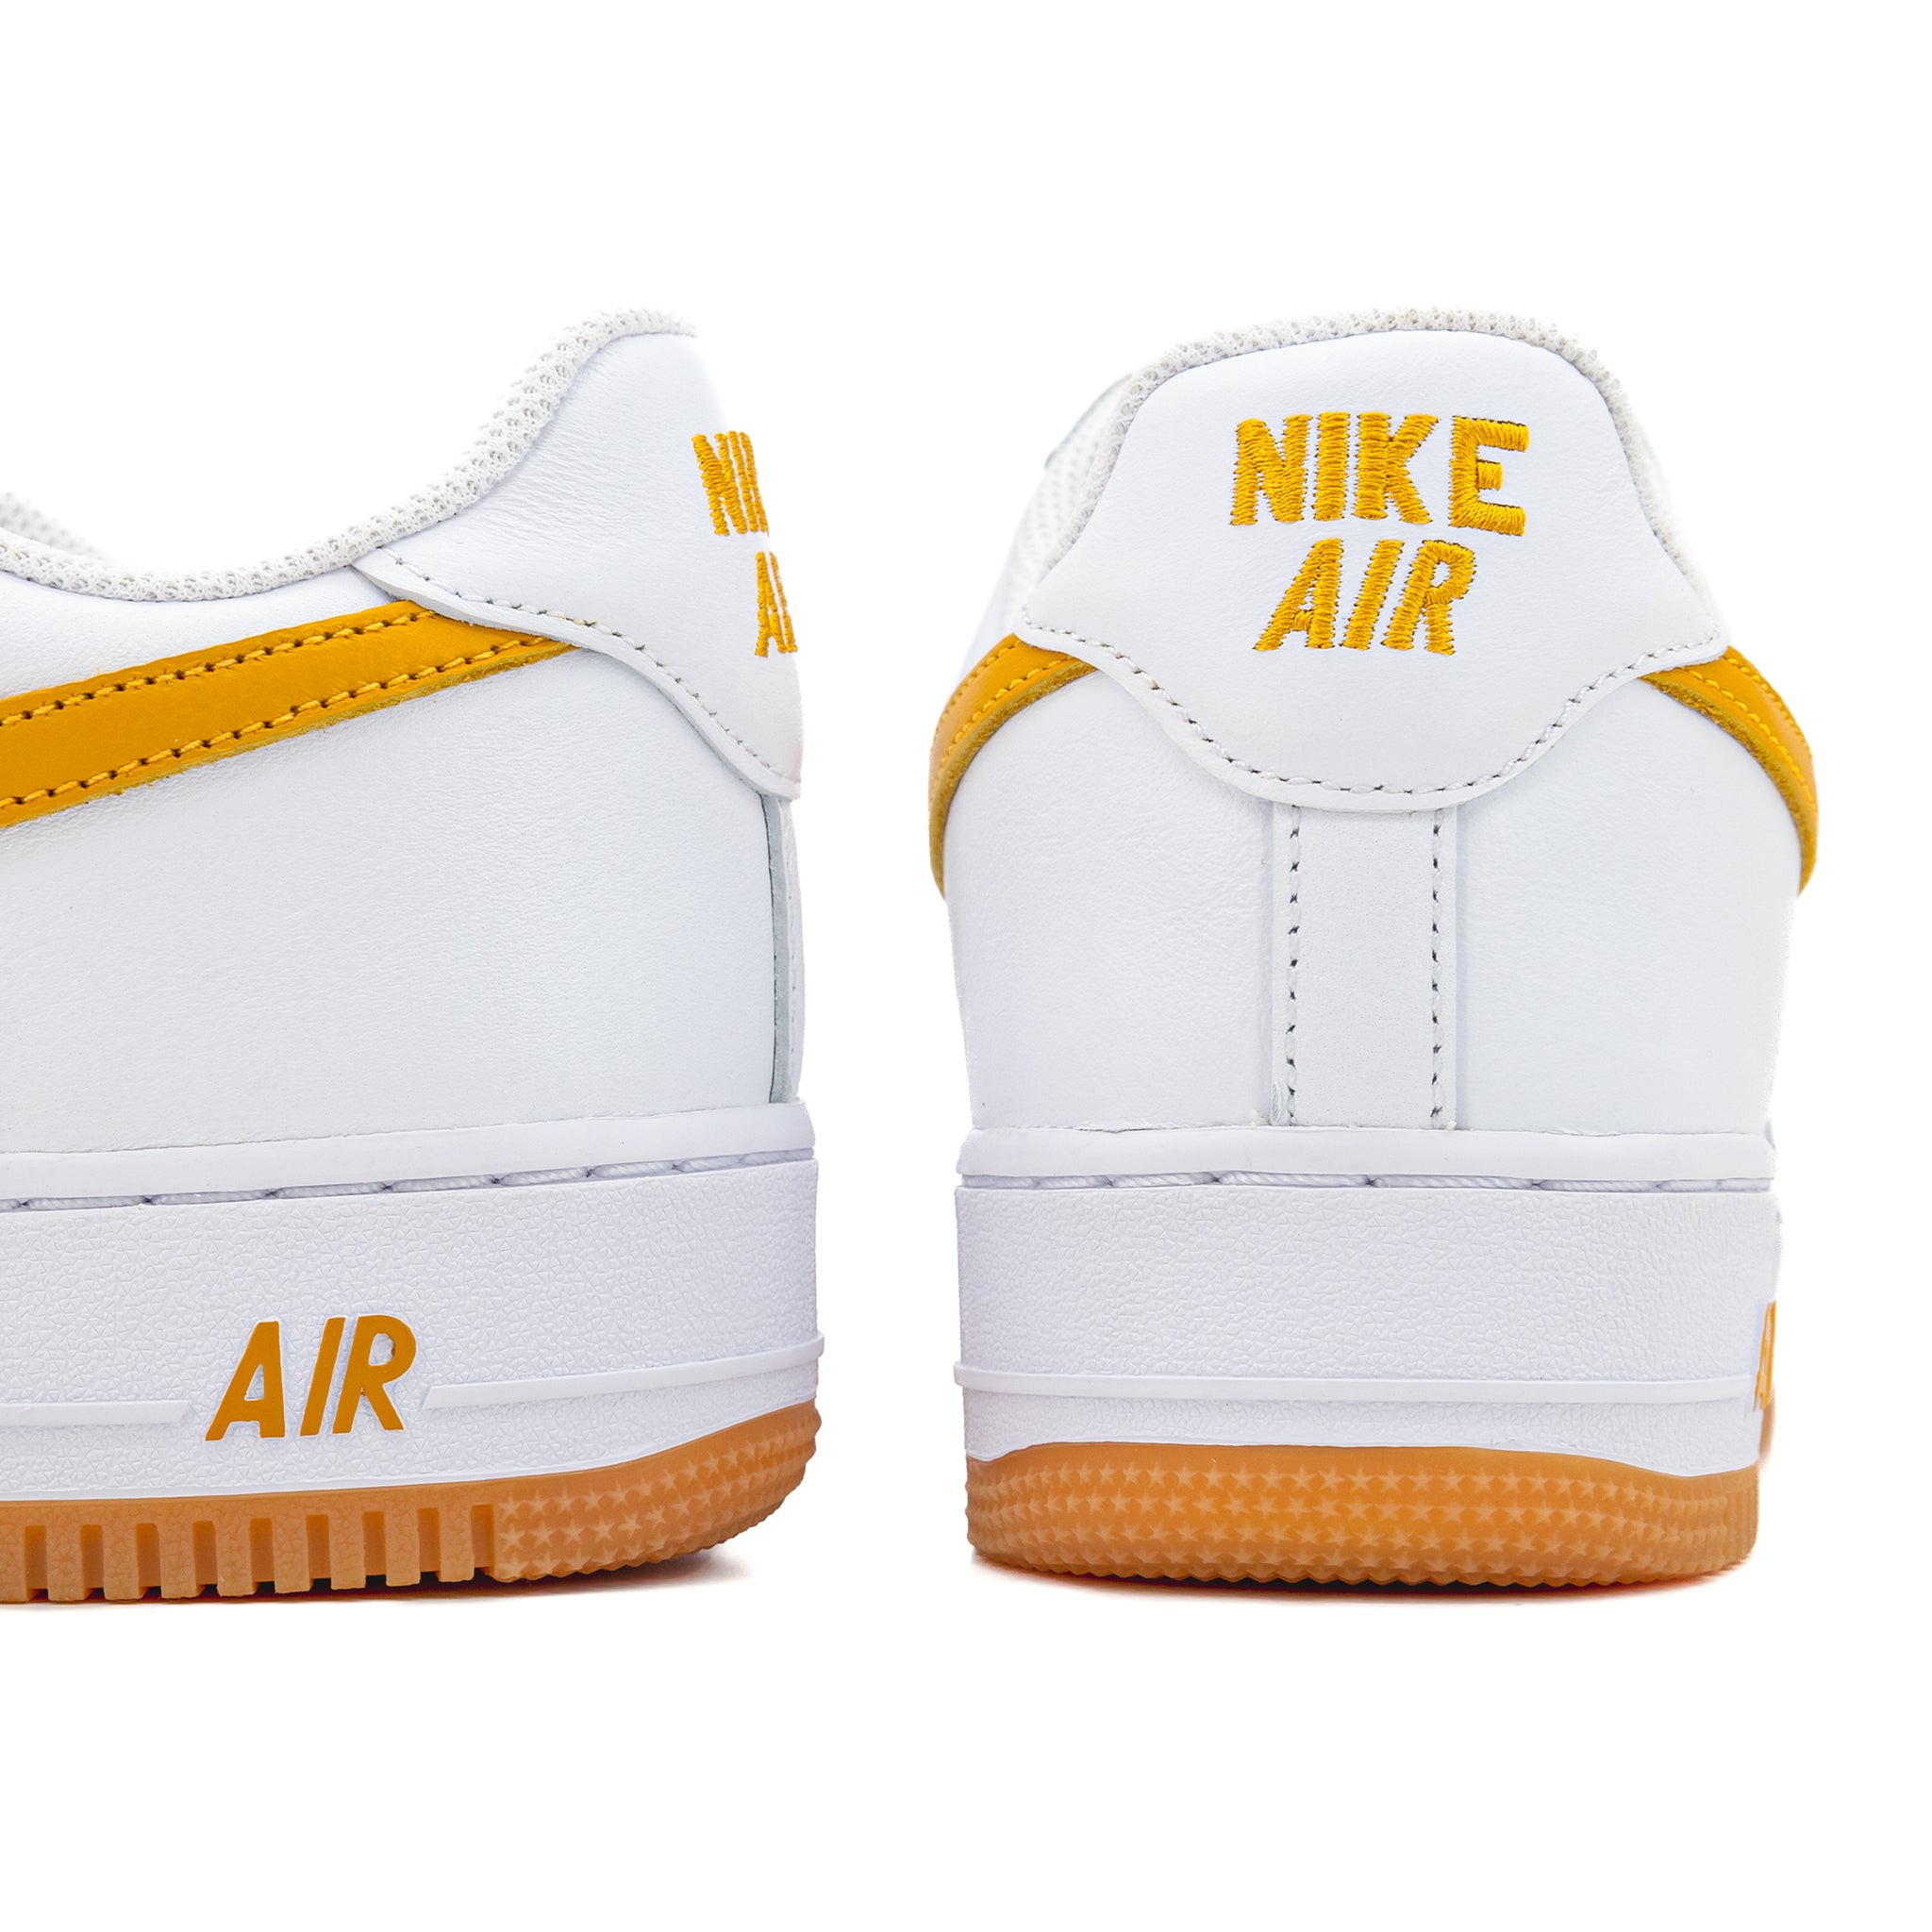 Nike Air Force 1 Low Retro QS University Gold FD7039-100 AF1 Shoes Sneakers